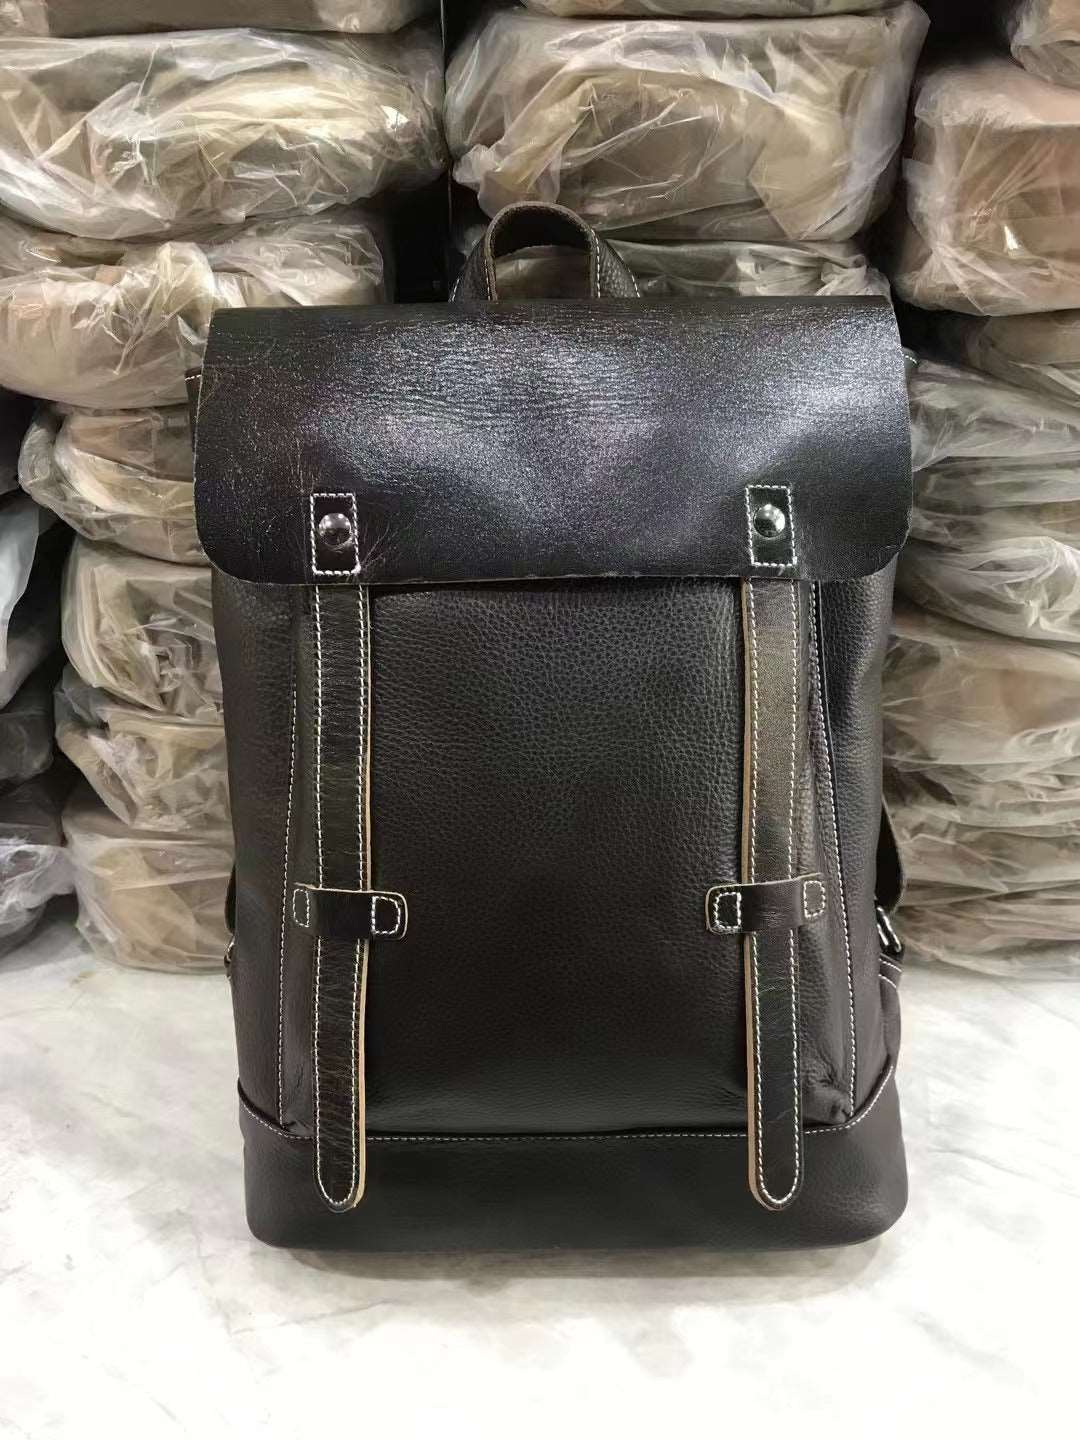 Functional Vintage Leather Men's Backpack for Travel and Everyday Use Woyaza